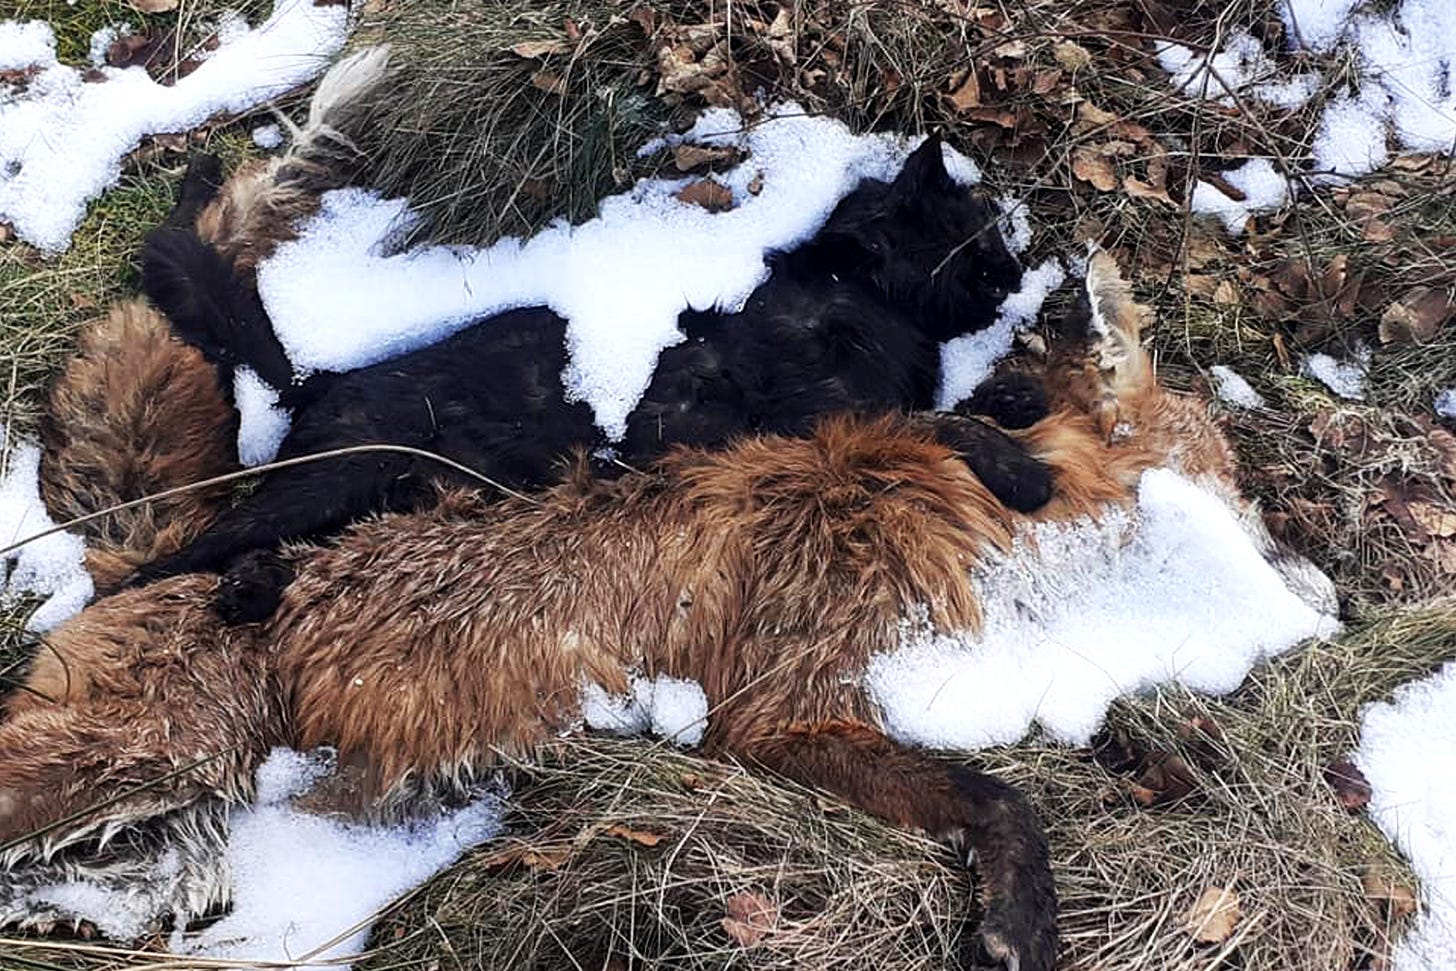 Black cat and red fox, both dead, laid next to each other in the snow.